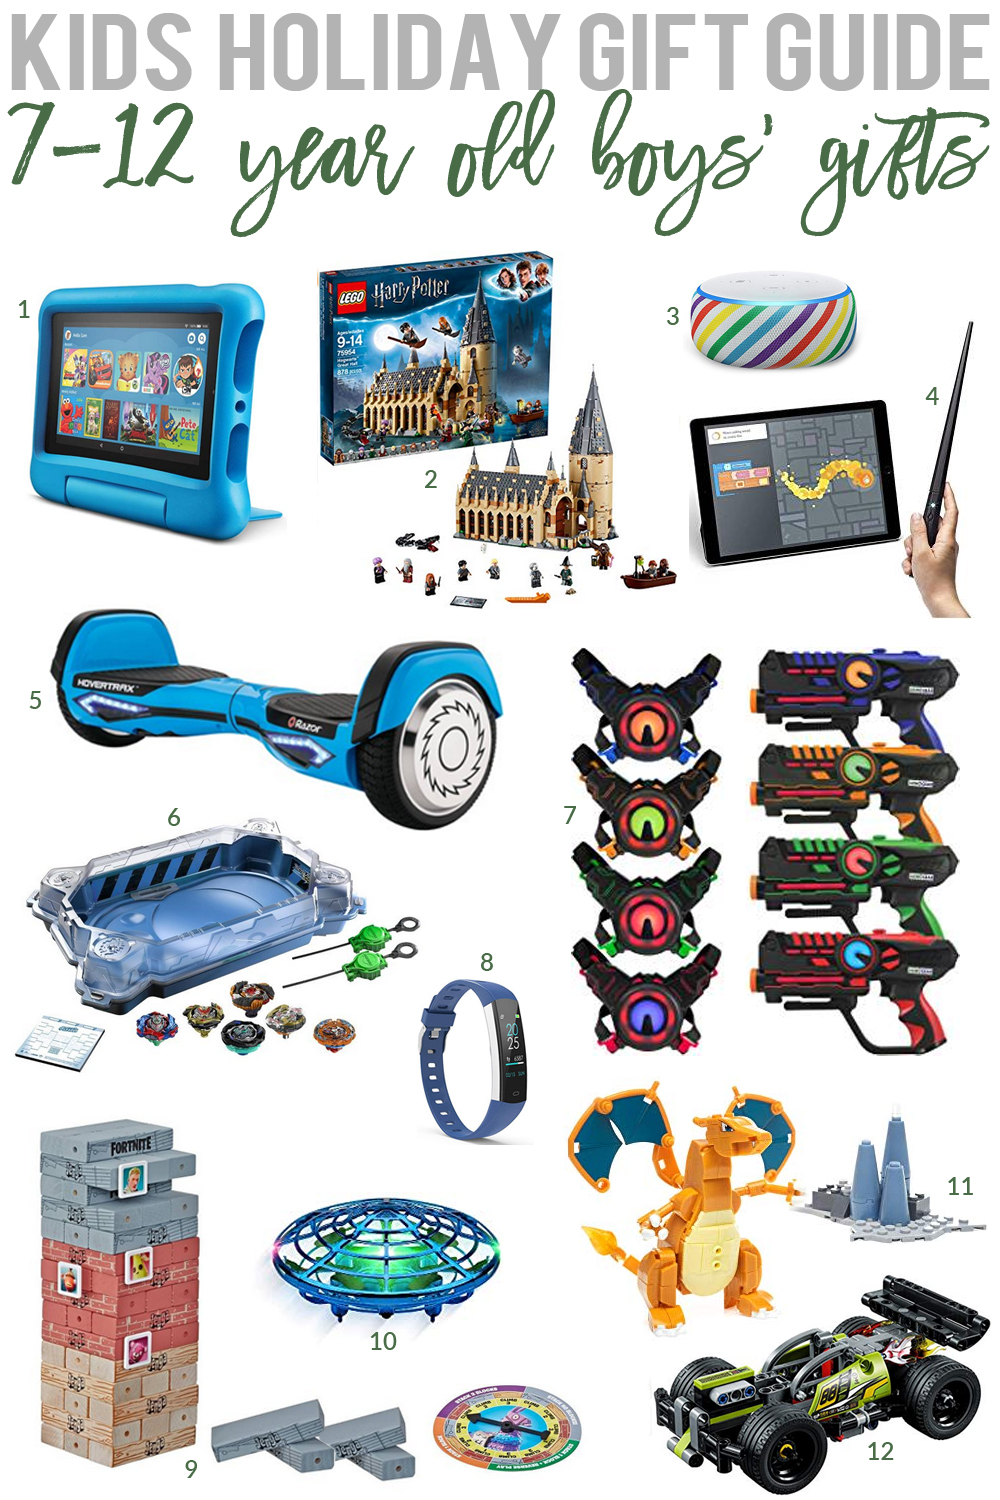 The Ultimate Kids Holiday Gift Guide: 3-17 Years Old